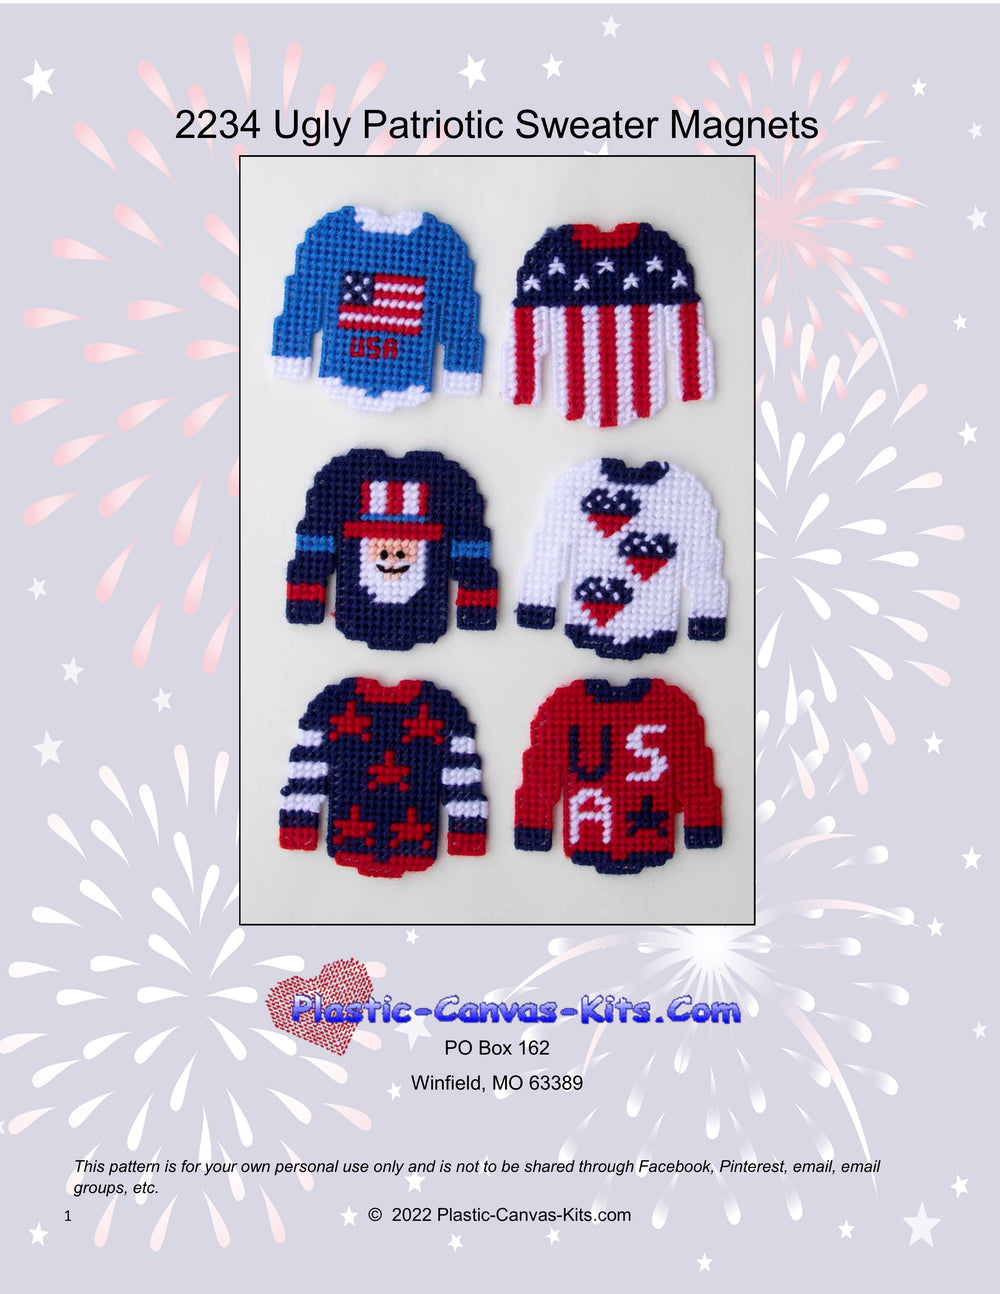 Ugly Patriotic Sweaters Magnets